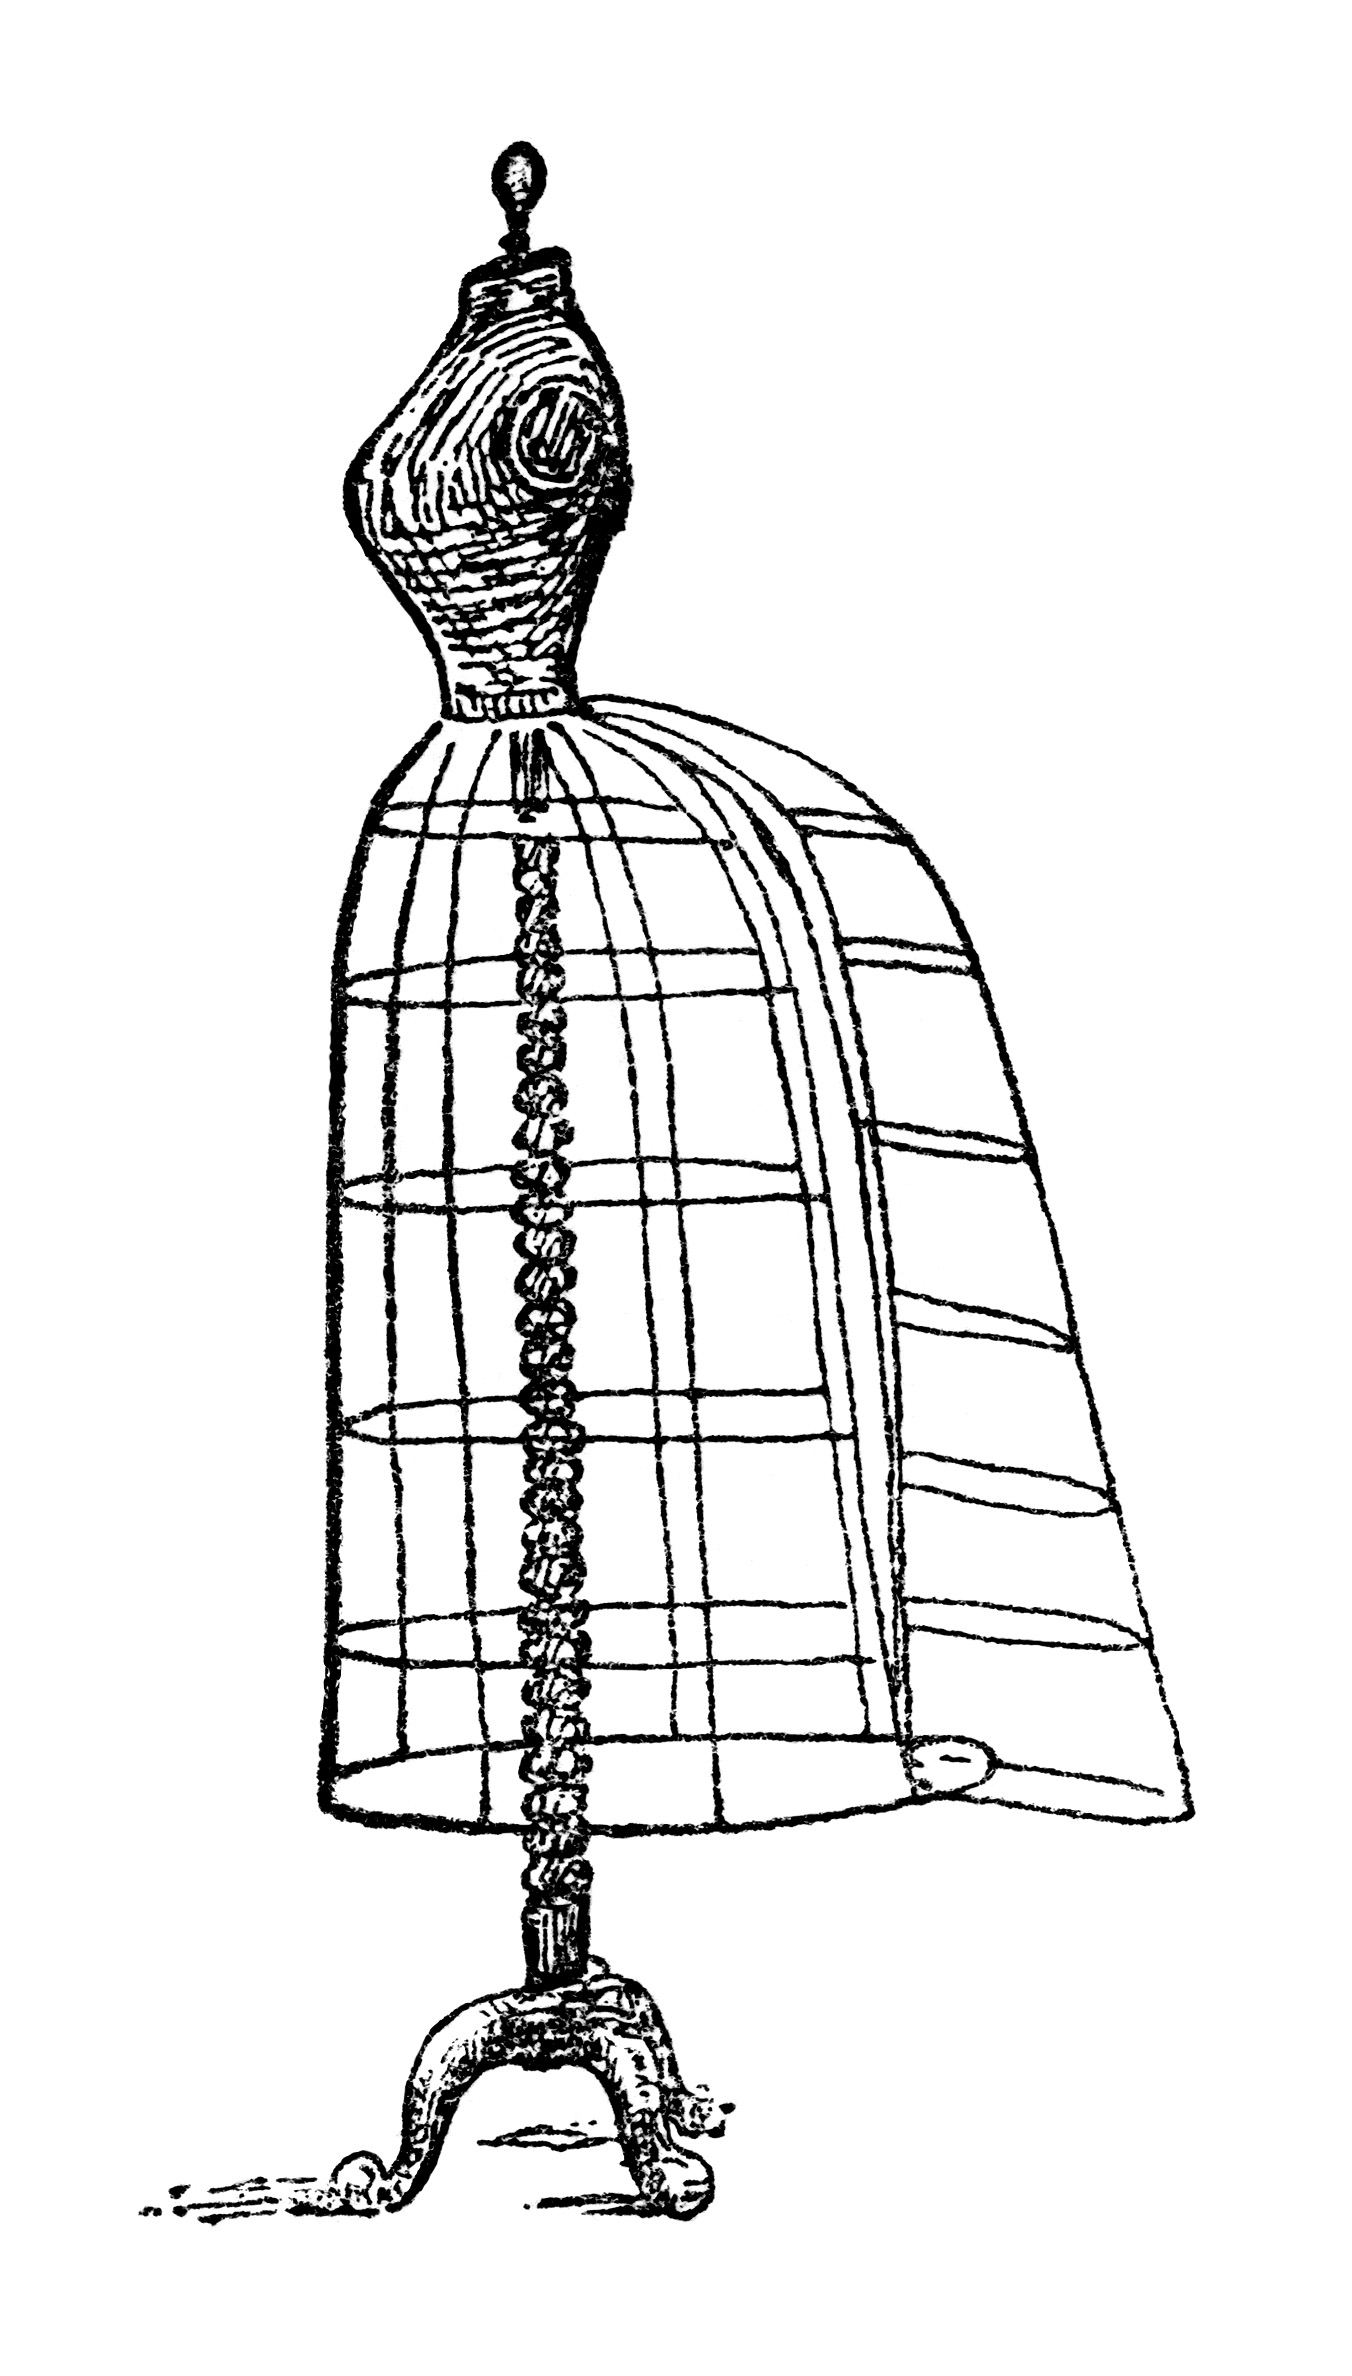 mrs beeton dress stand, victorian dress form image, vintage sewing clip art, black and white clipart, wire dress form illustration